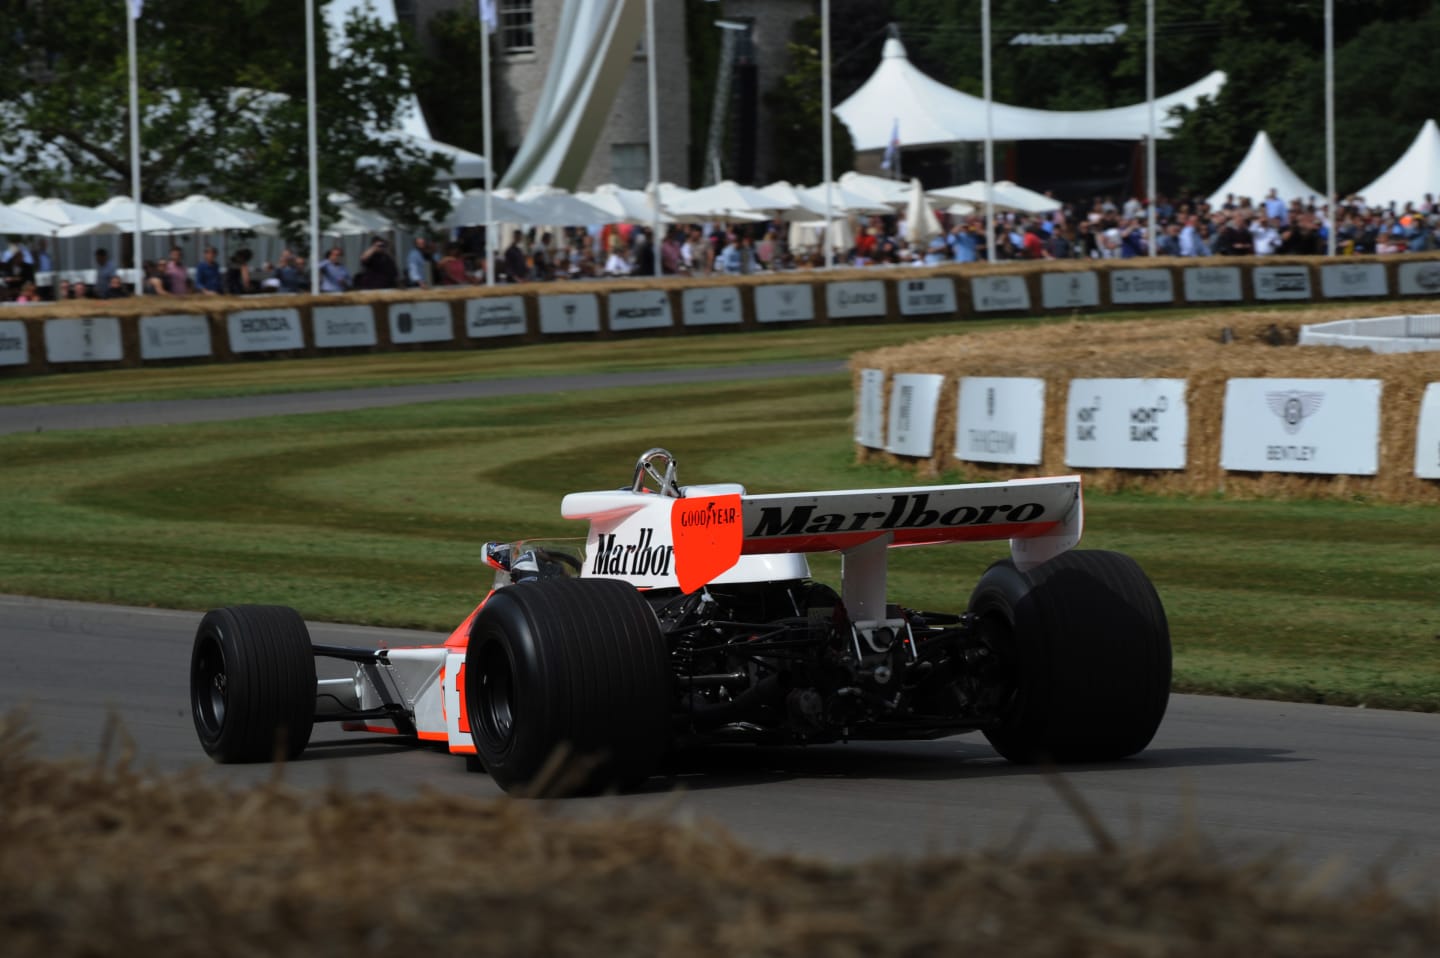 www.sutton-images.com Emerson Fittipaldi (BRA) McLaren M23 at Goodwood Festival of Speed, Goodwood, England, 30 June - 2 July 2017. © Sutton Images